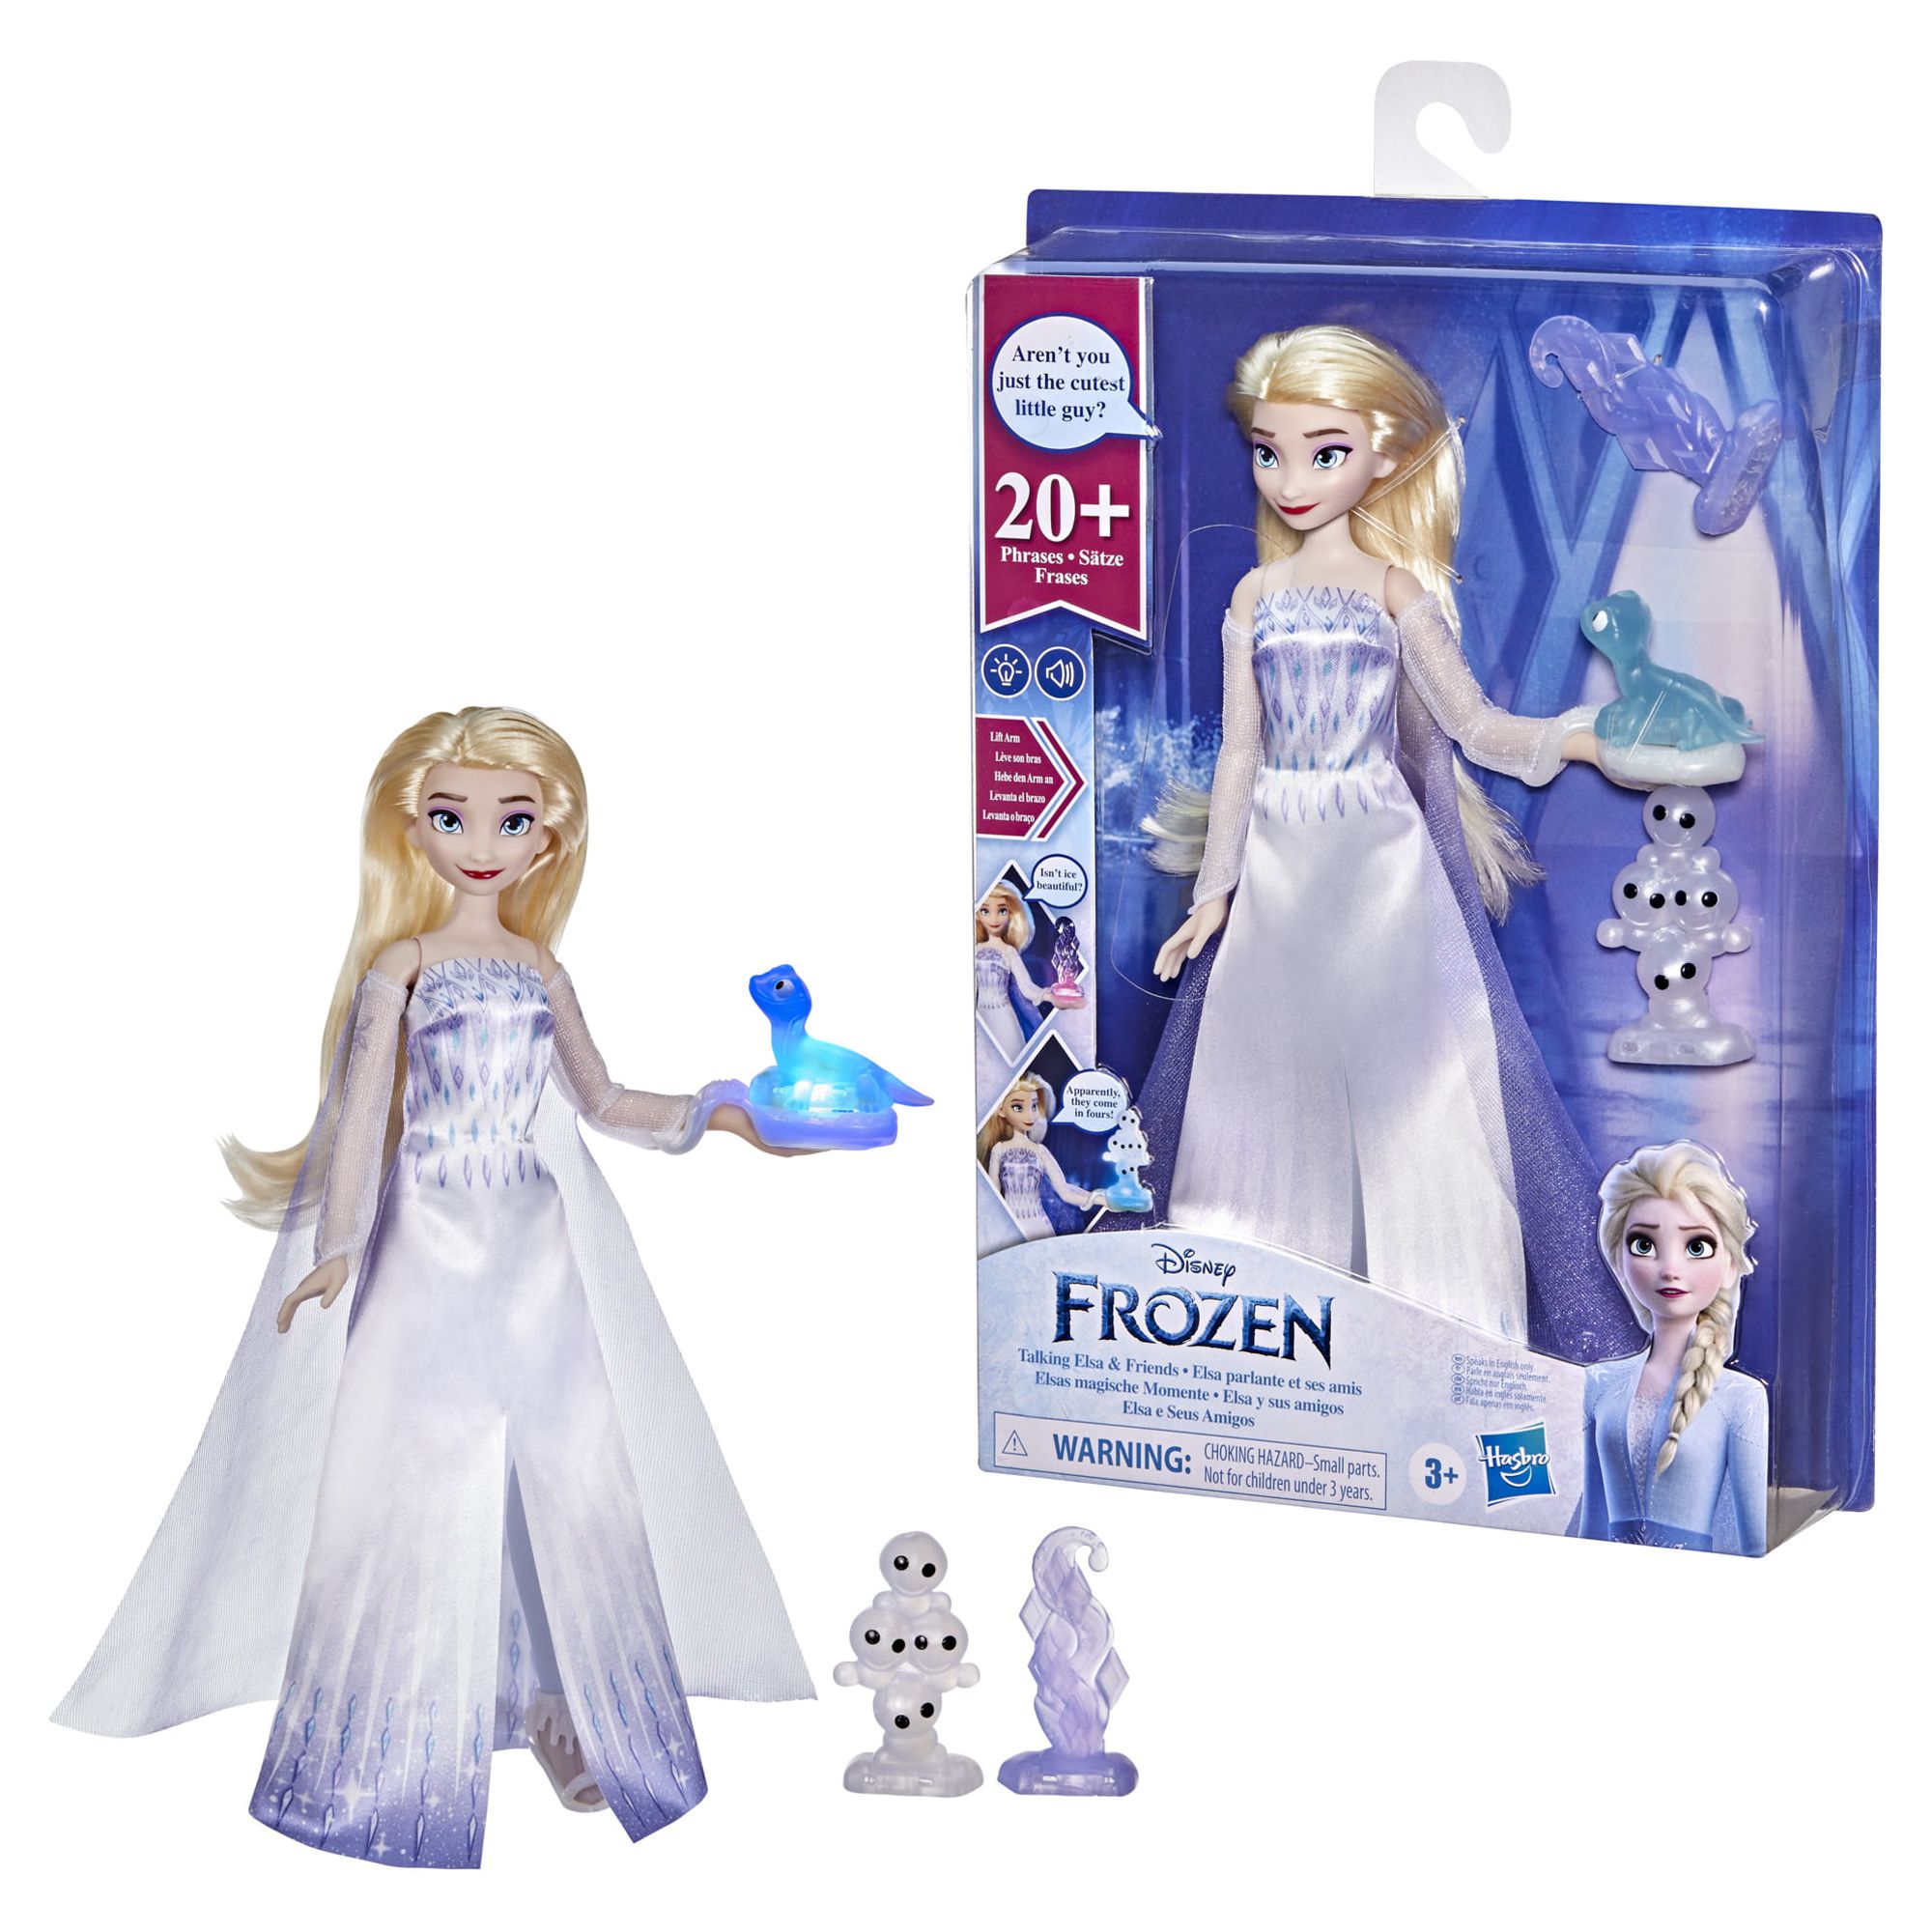 Disney's Frozen 2 Talking Elsa and Friends Elsa Doll, 20+ Sounds and Phrases - image 3 of 5